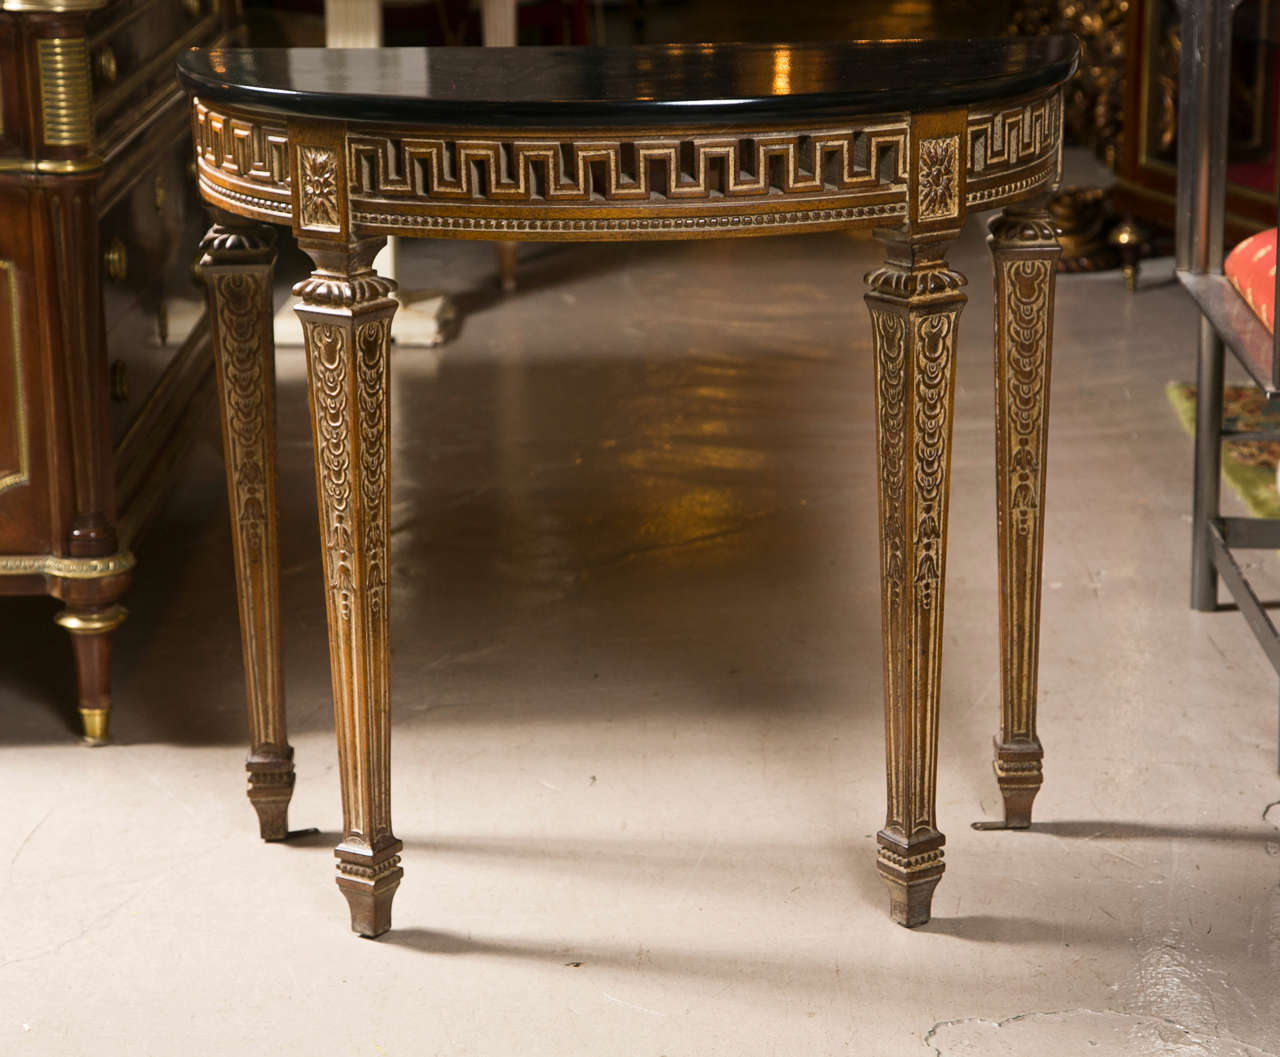 Pair of French Louis XVI style demilune console tables, circa 1940s, faux finished ebonized top over a narrow frieze with pierce-carved greey key motif, raised on four squared tapering legs ending in toupie feet.